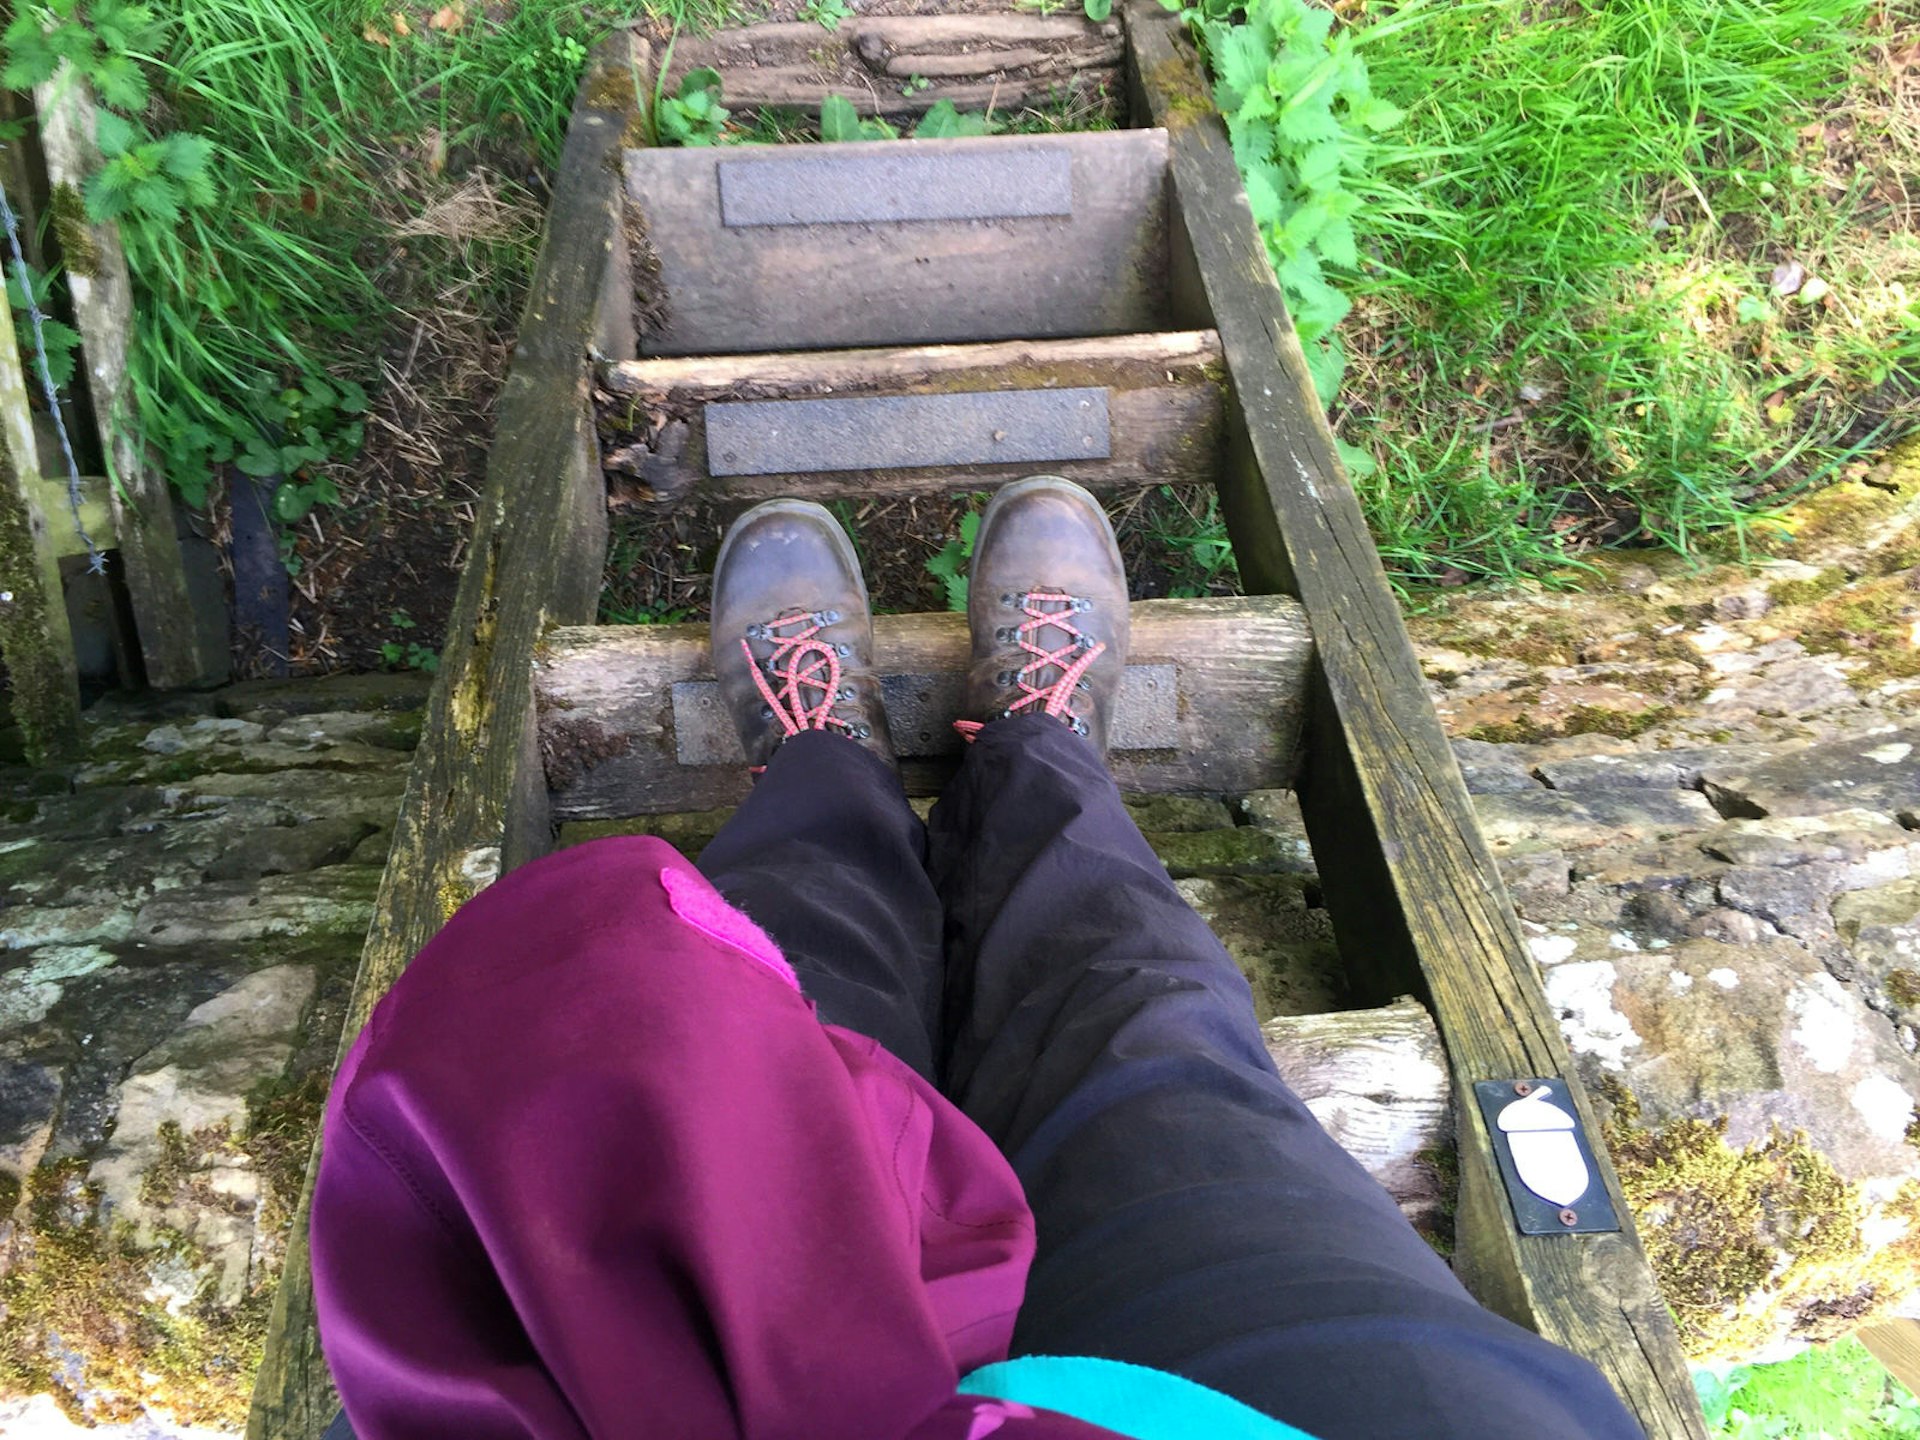 View of a walker's legs and boots standing on stile steps